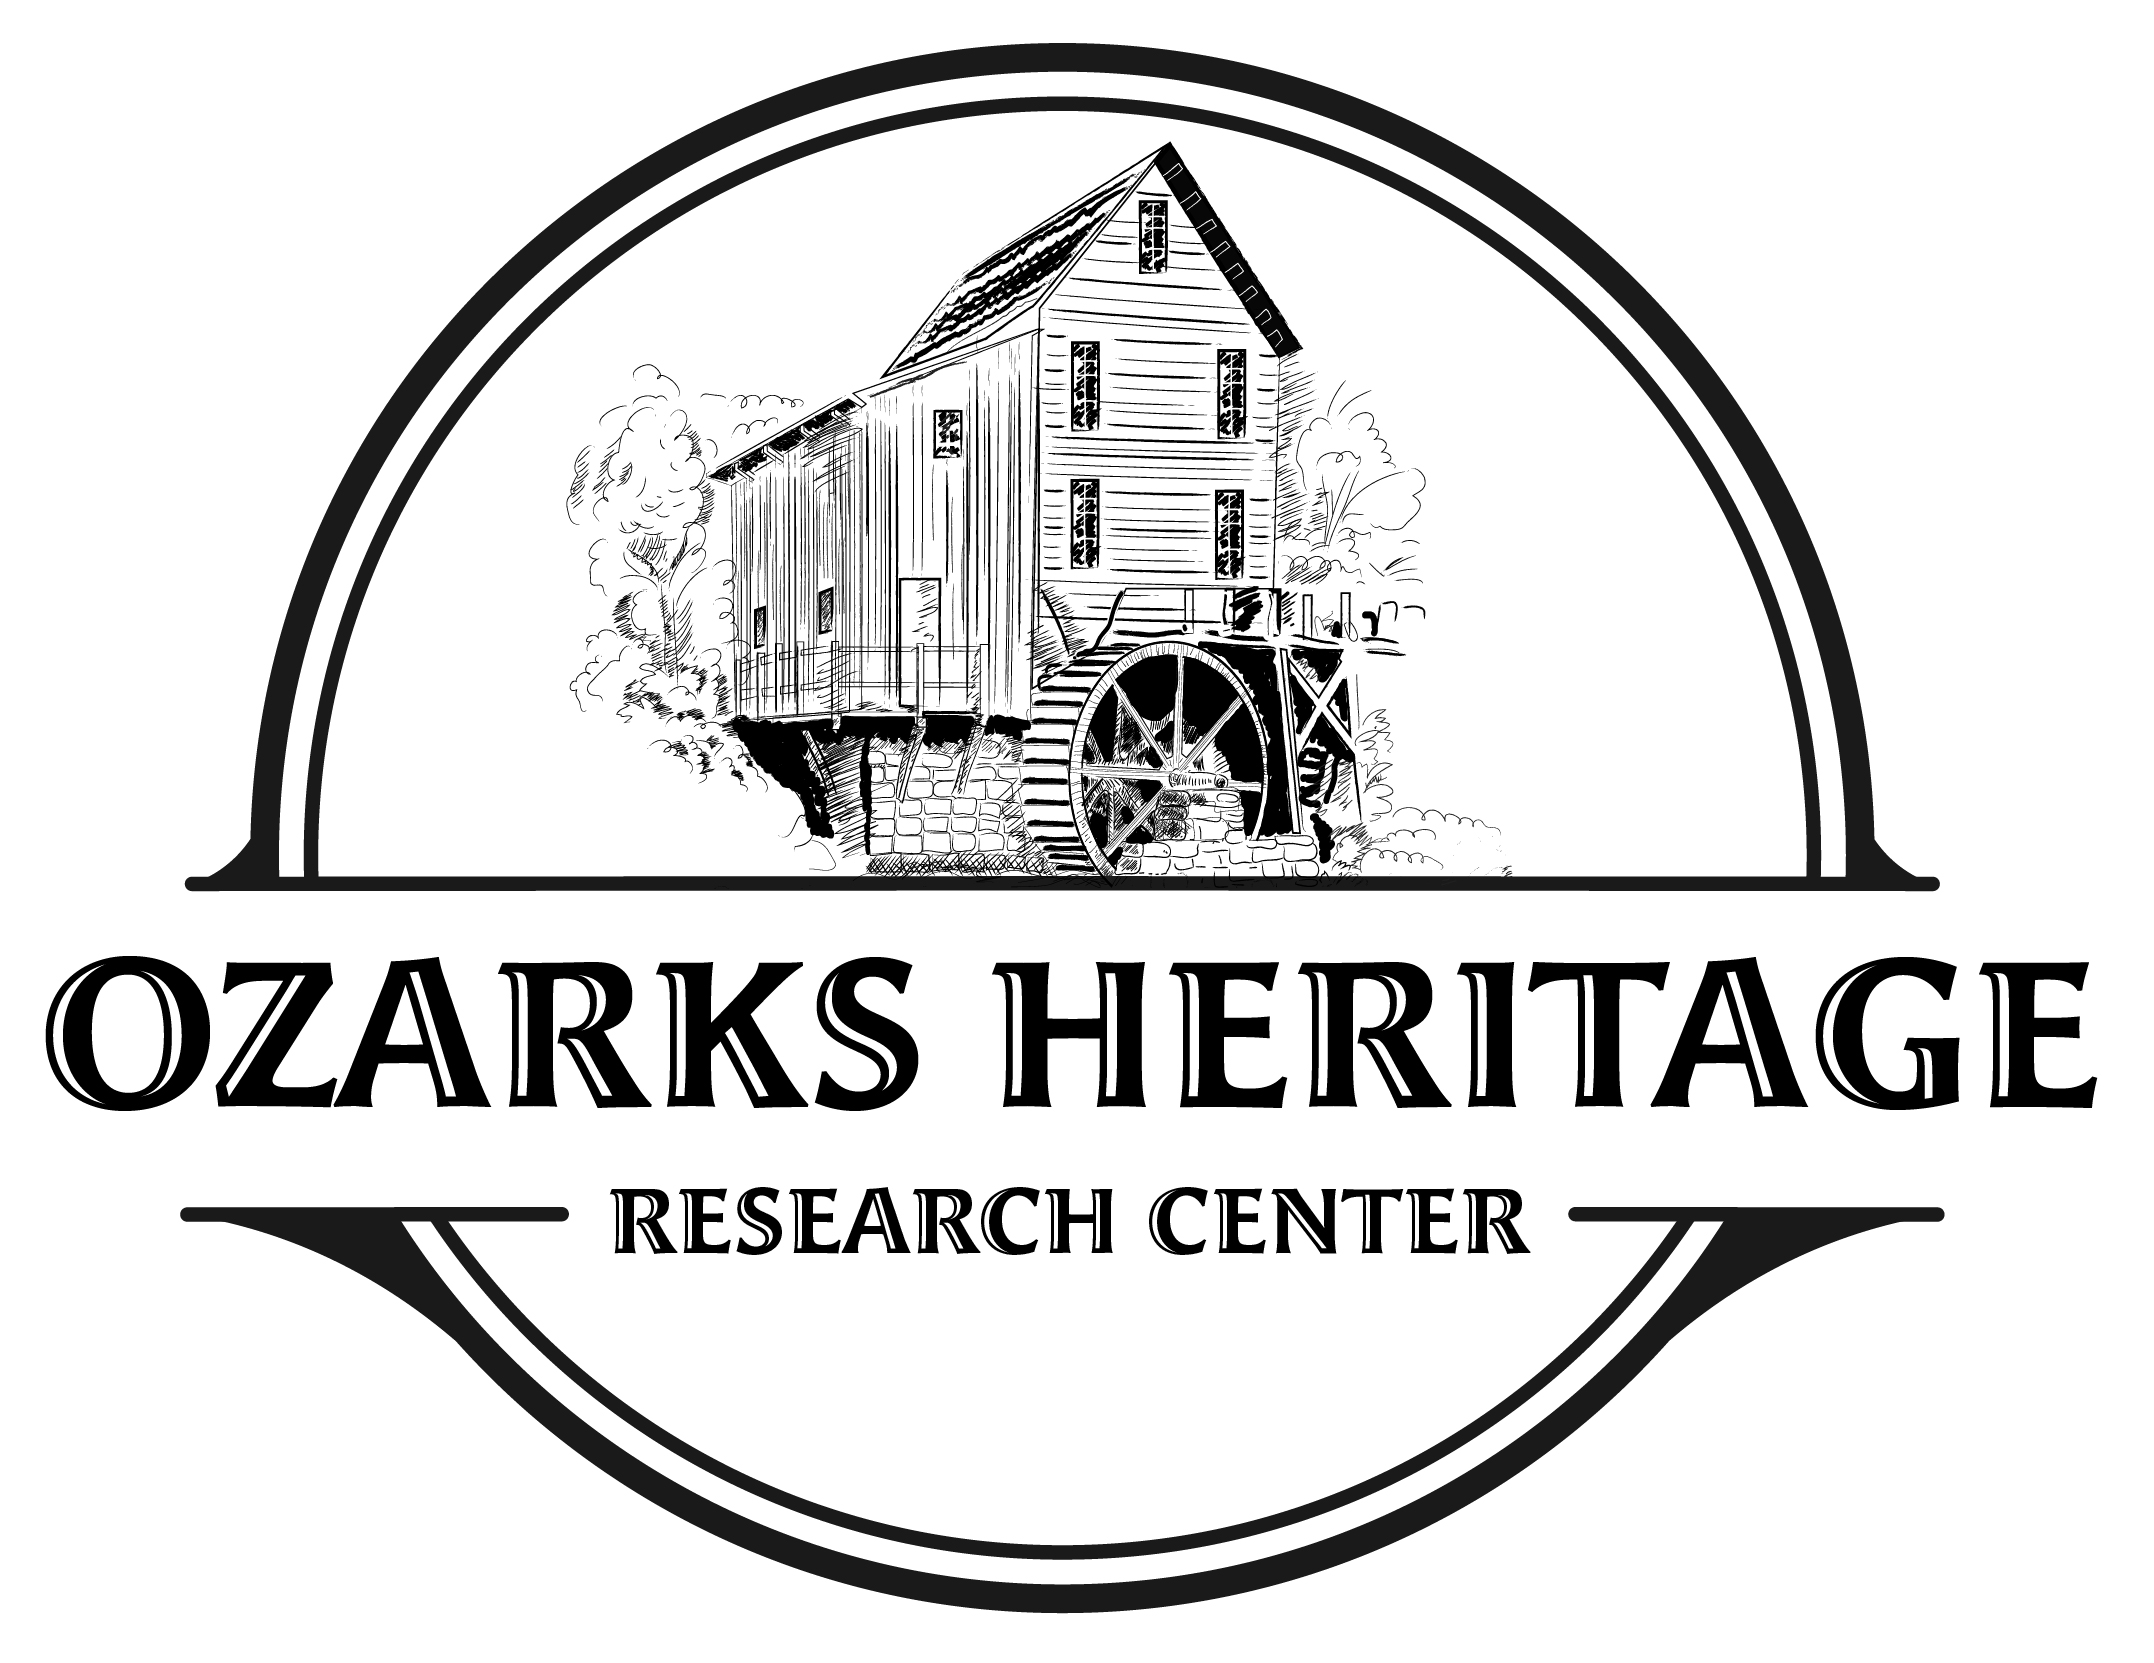 Ozarks Heritage Research Center logo in black and white